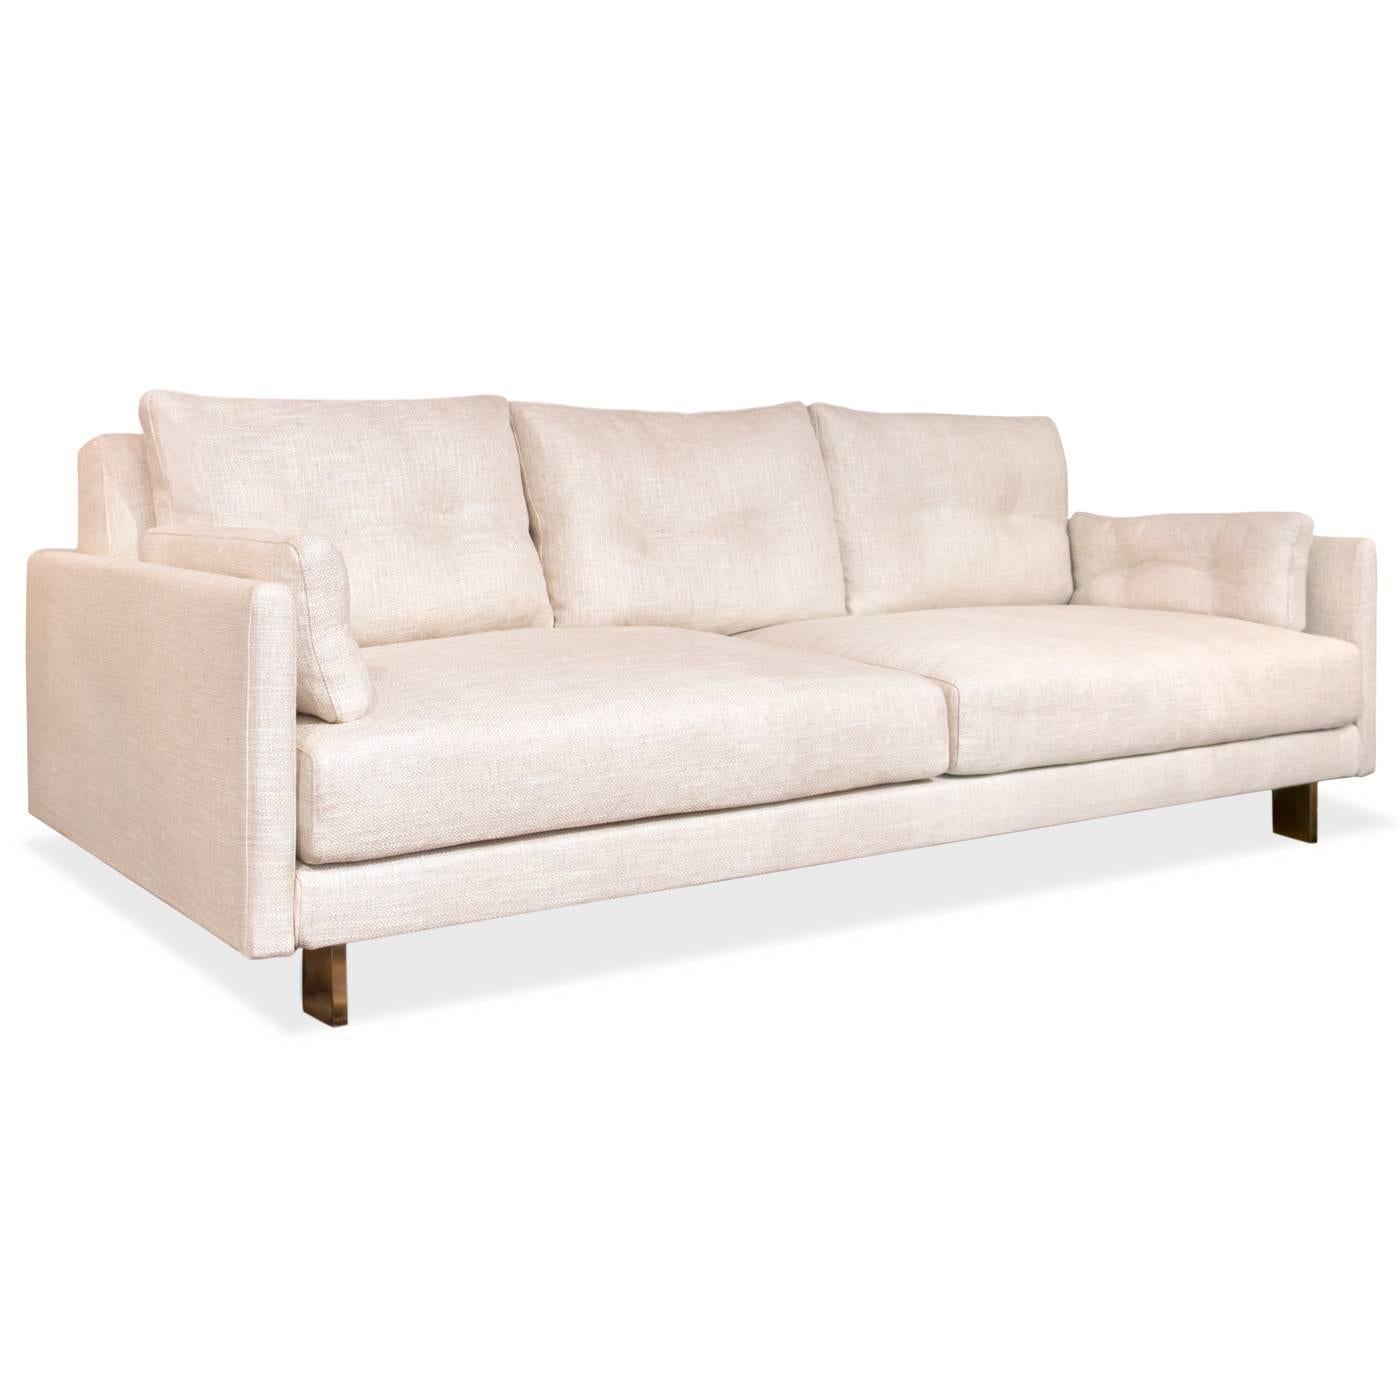 California Modern. Deep and squishy, family-friendly, and très chic you can have it all. Upholstered in Mulholland Pearl bouclé with minimal brushed brass legs. Combine details like inviting pin-tucked back and side cushions, with removable,